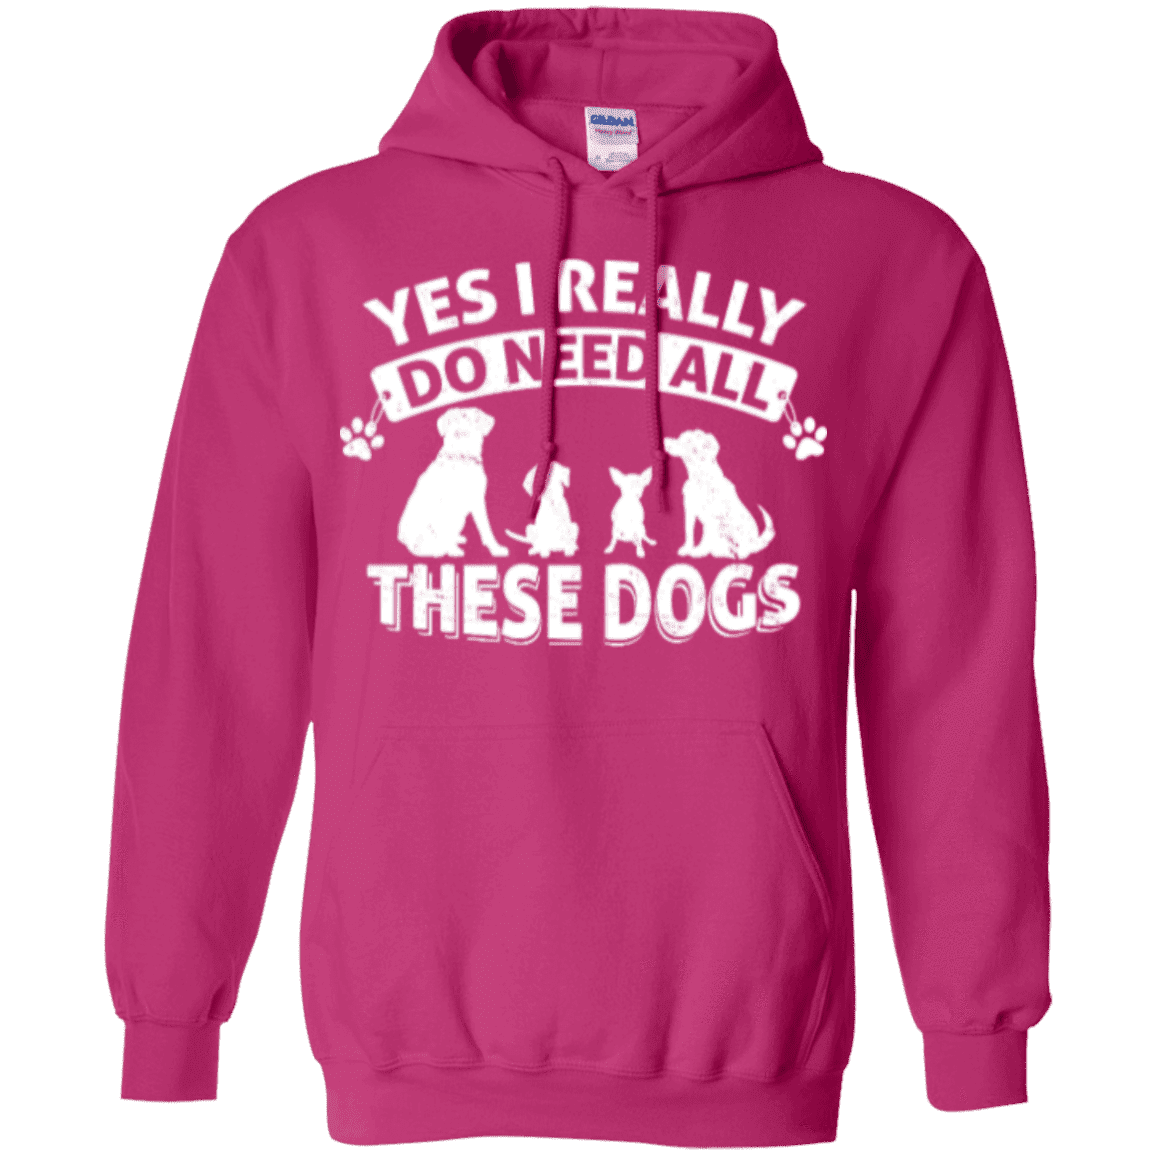 Yes I Need All These Dogs - Hoodie.